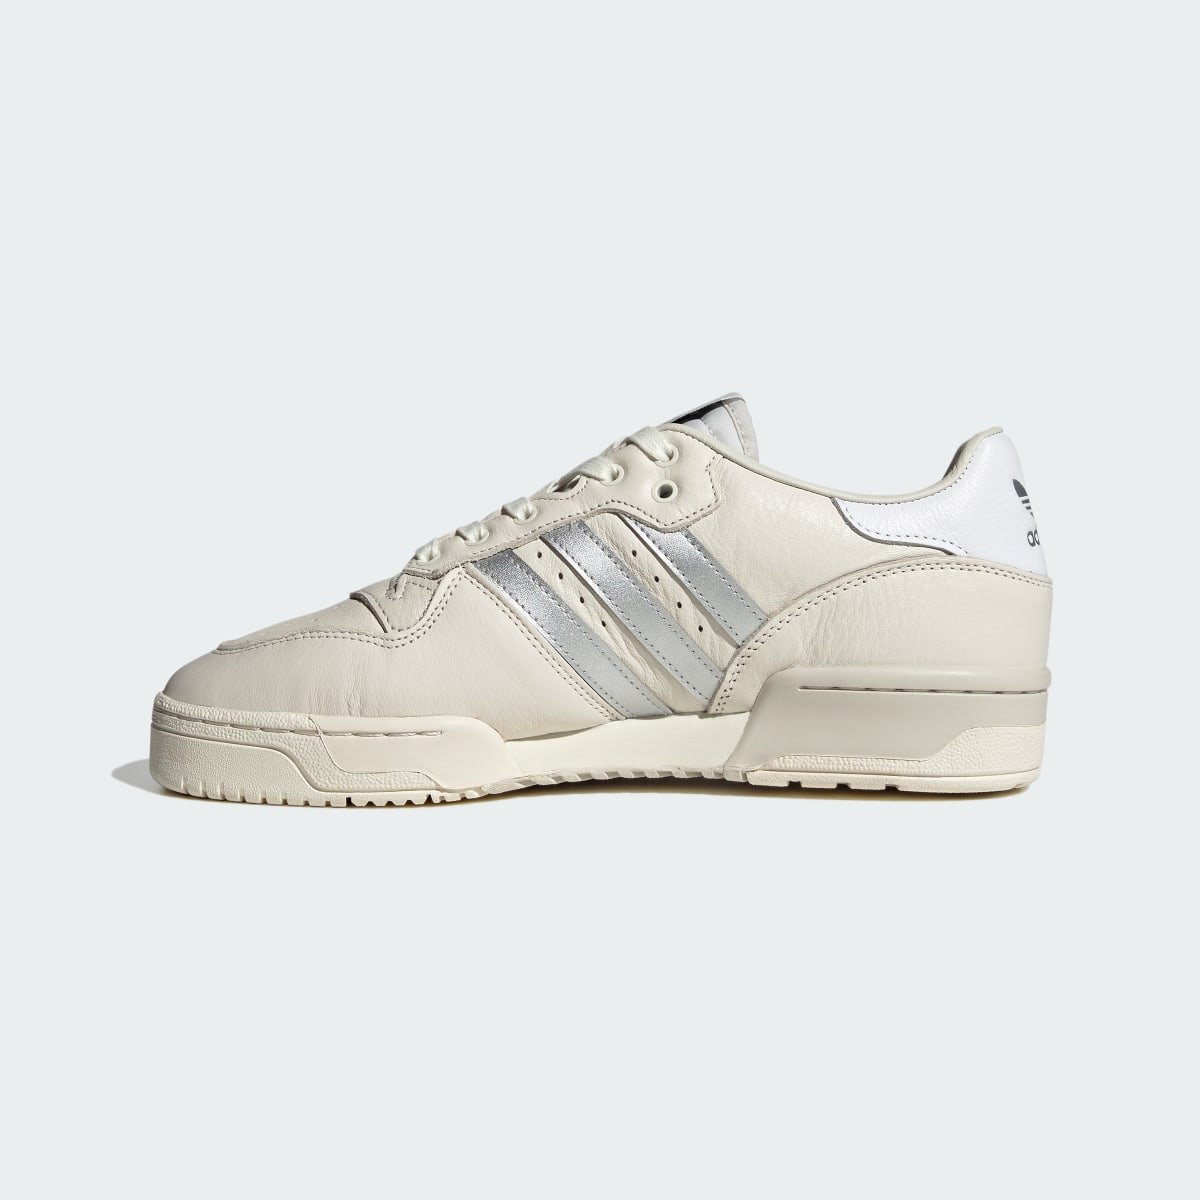 Adidas Chaussure Rivalry Low Consortium. 8